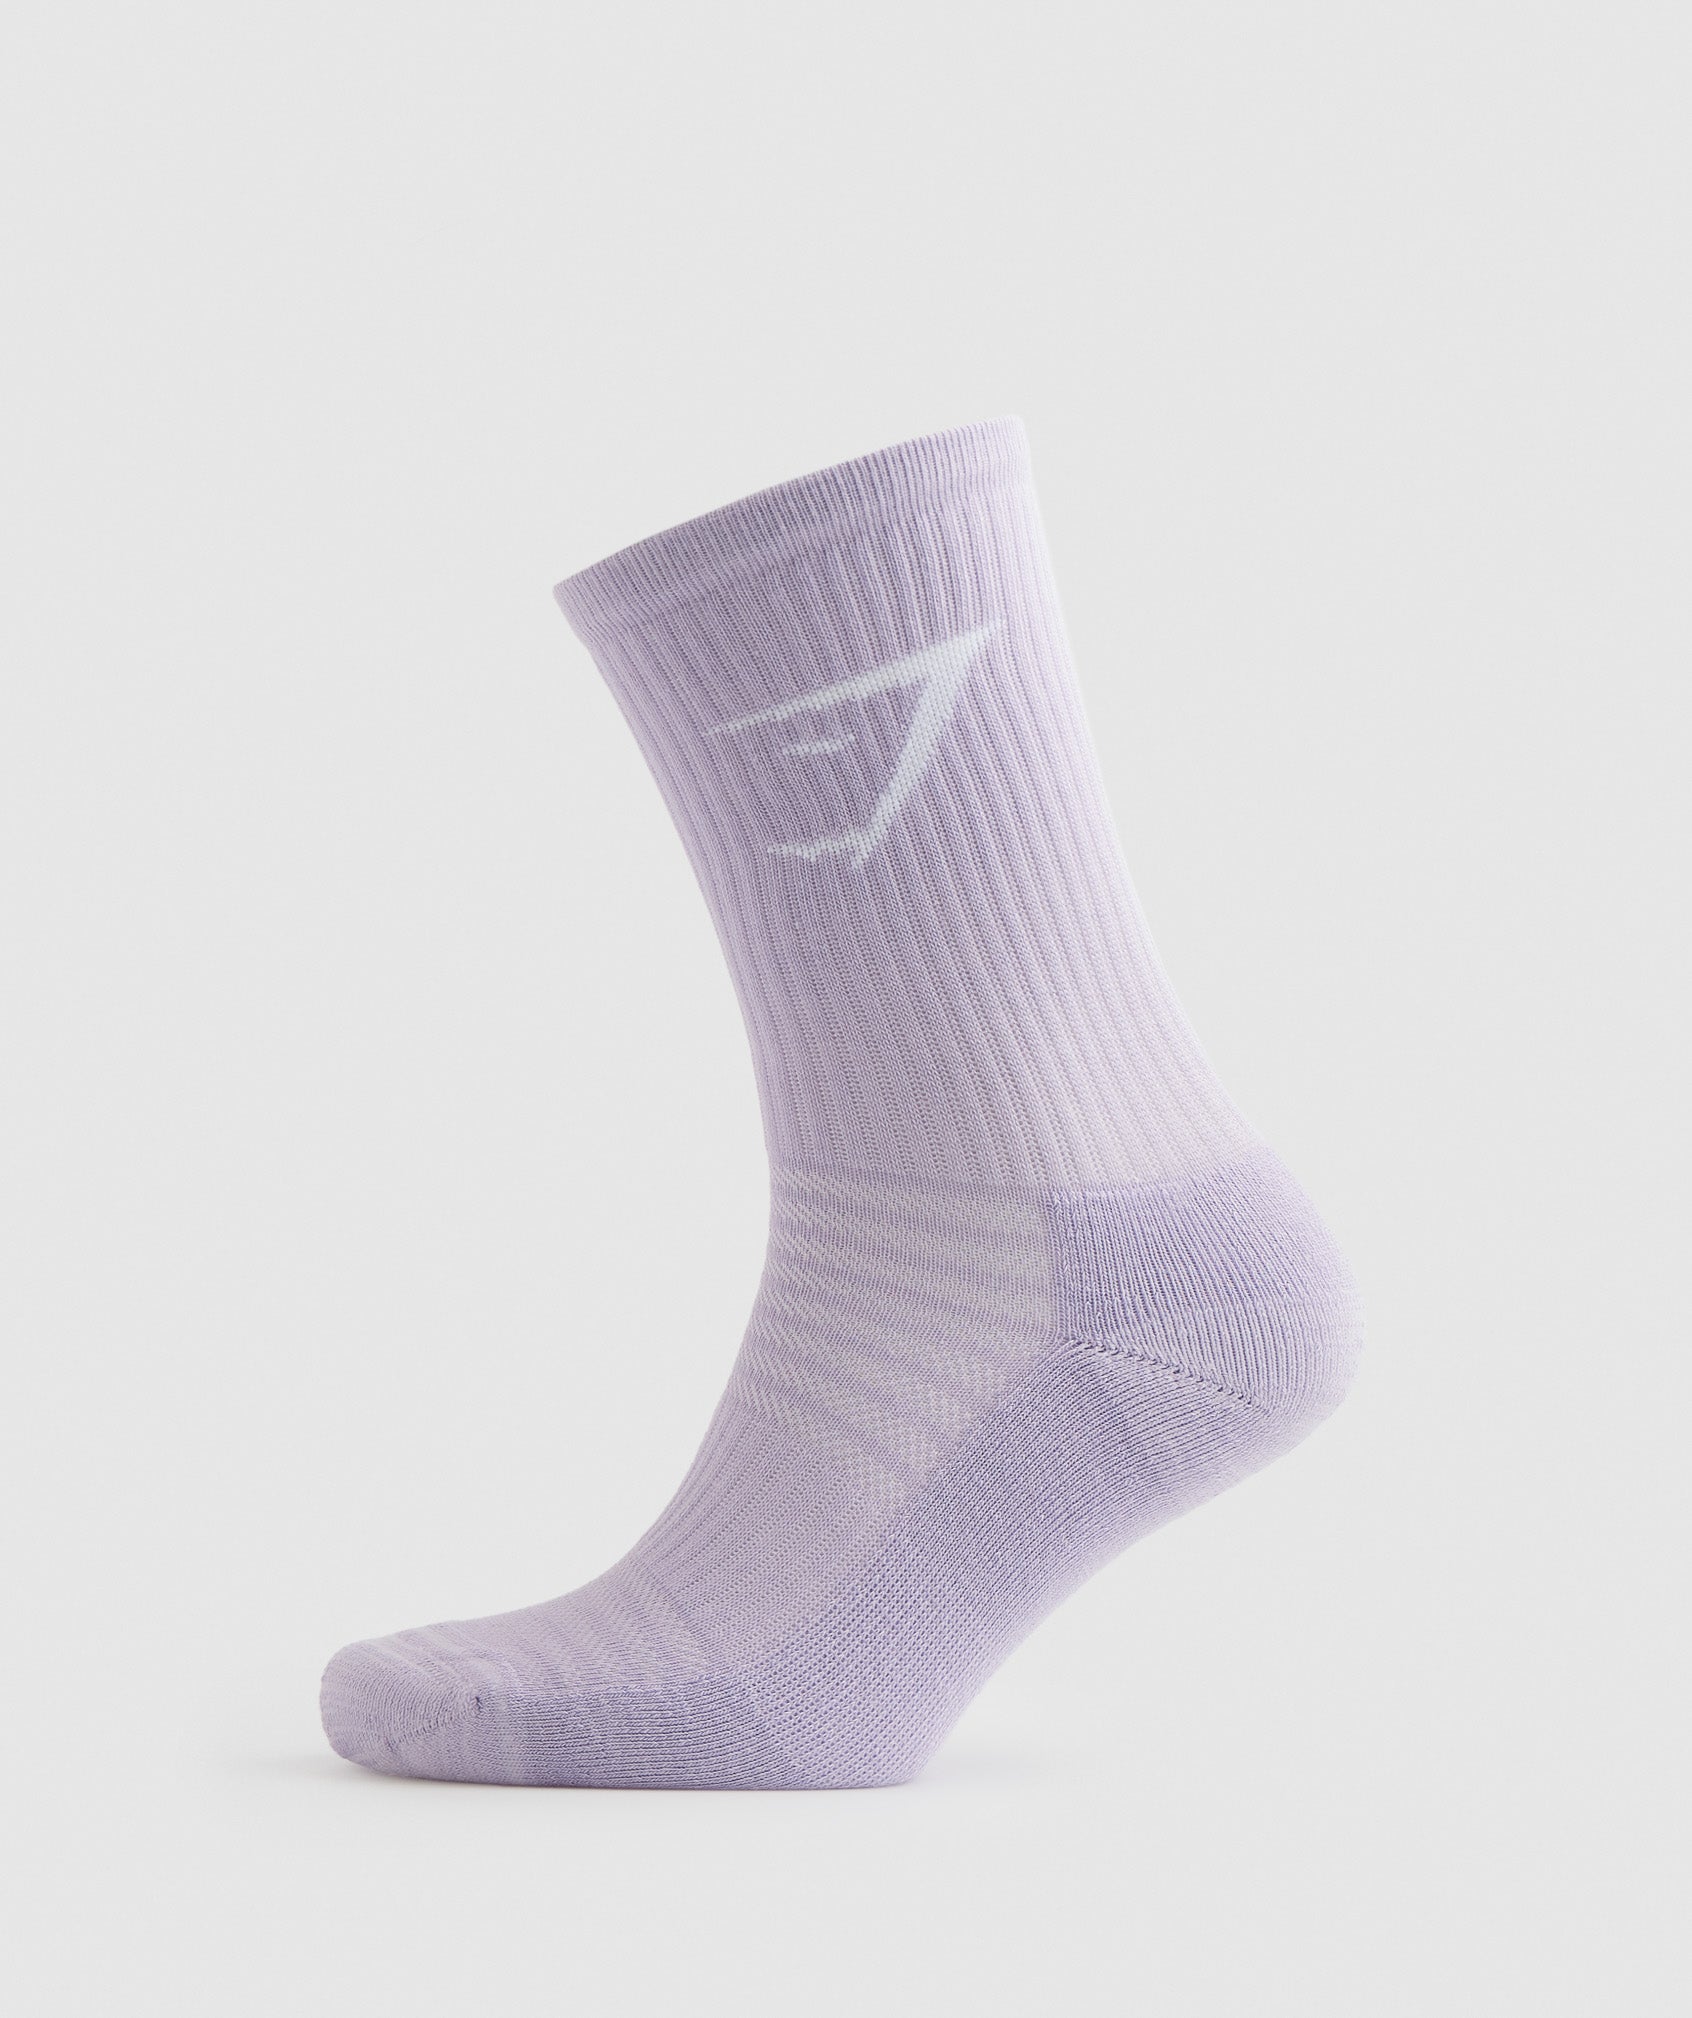 Crew Socks 3pk in Faded Lilac/Lavender Blue/Cucumber Green - view 5